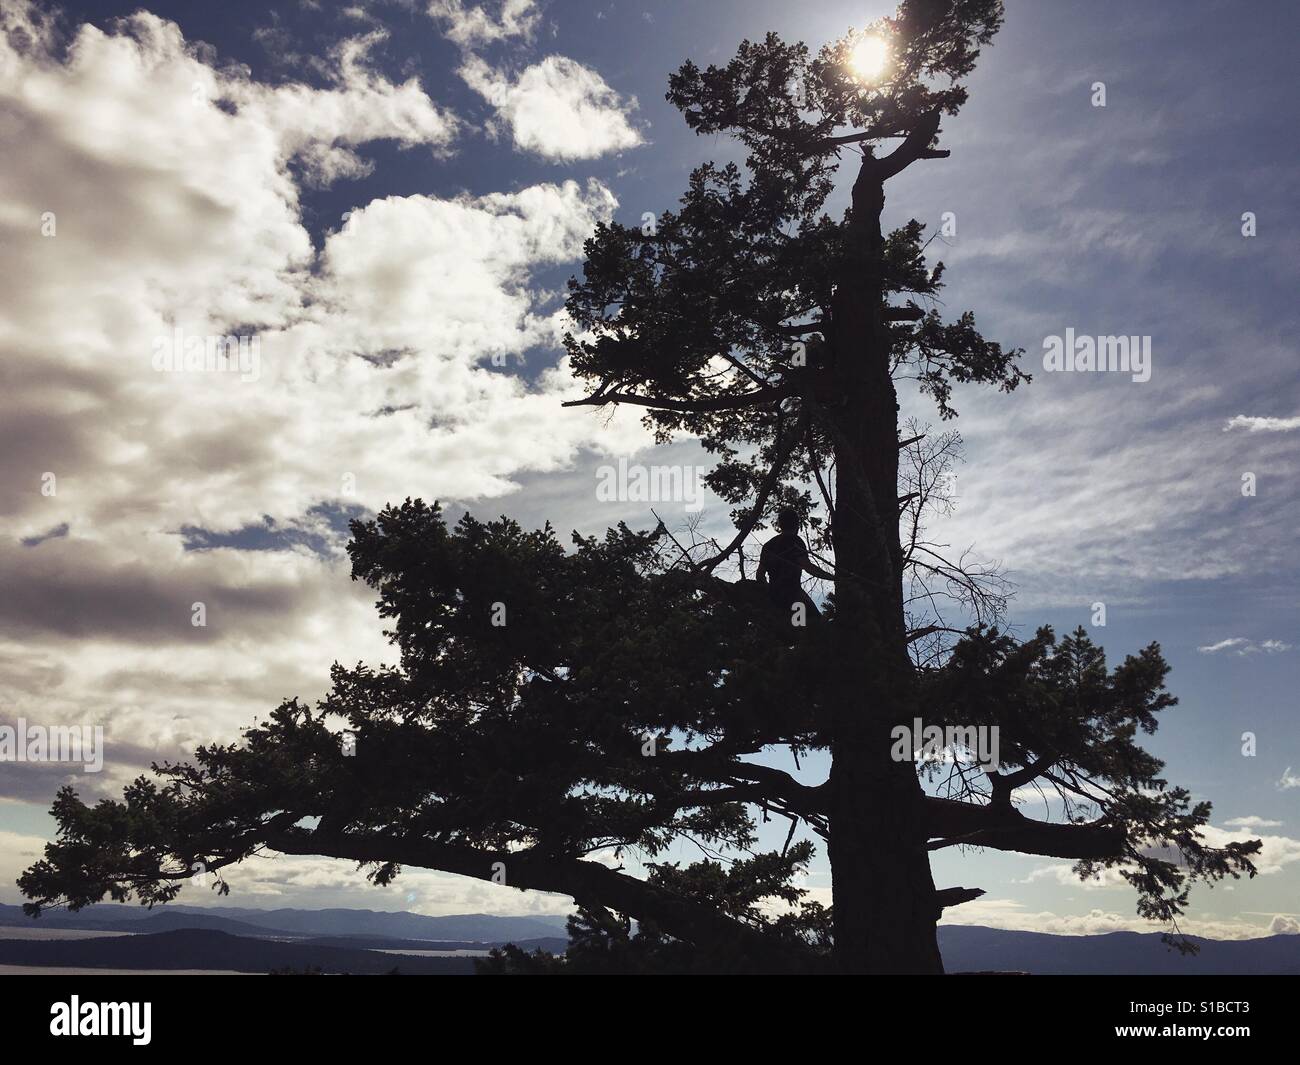 Silhouette of man in tall fir tree in the summer sun overlooking ocean and Islands in the Pacific Northwest Canada Stock Photo